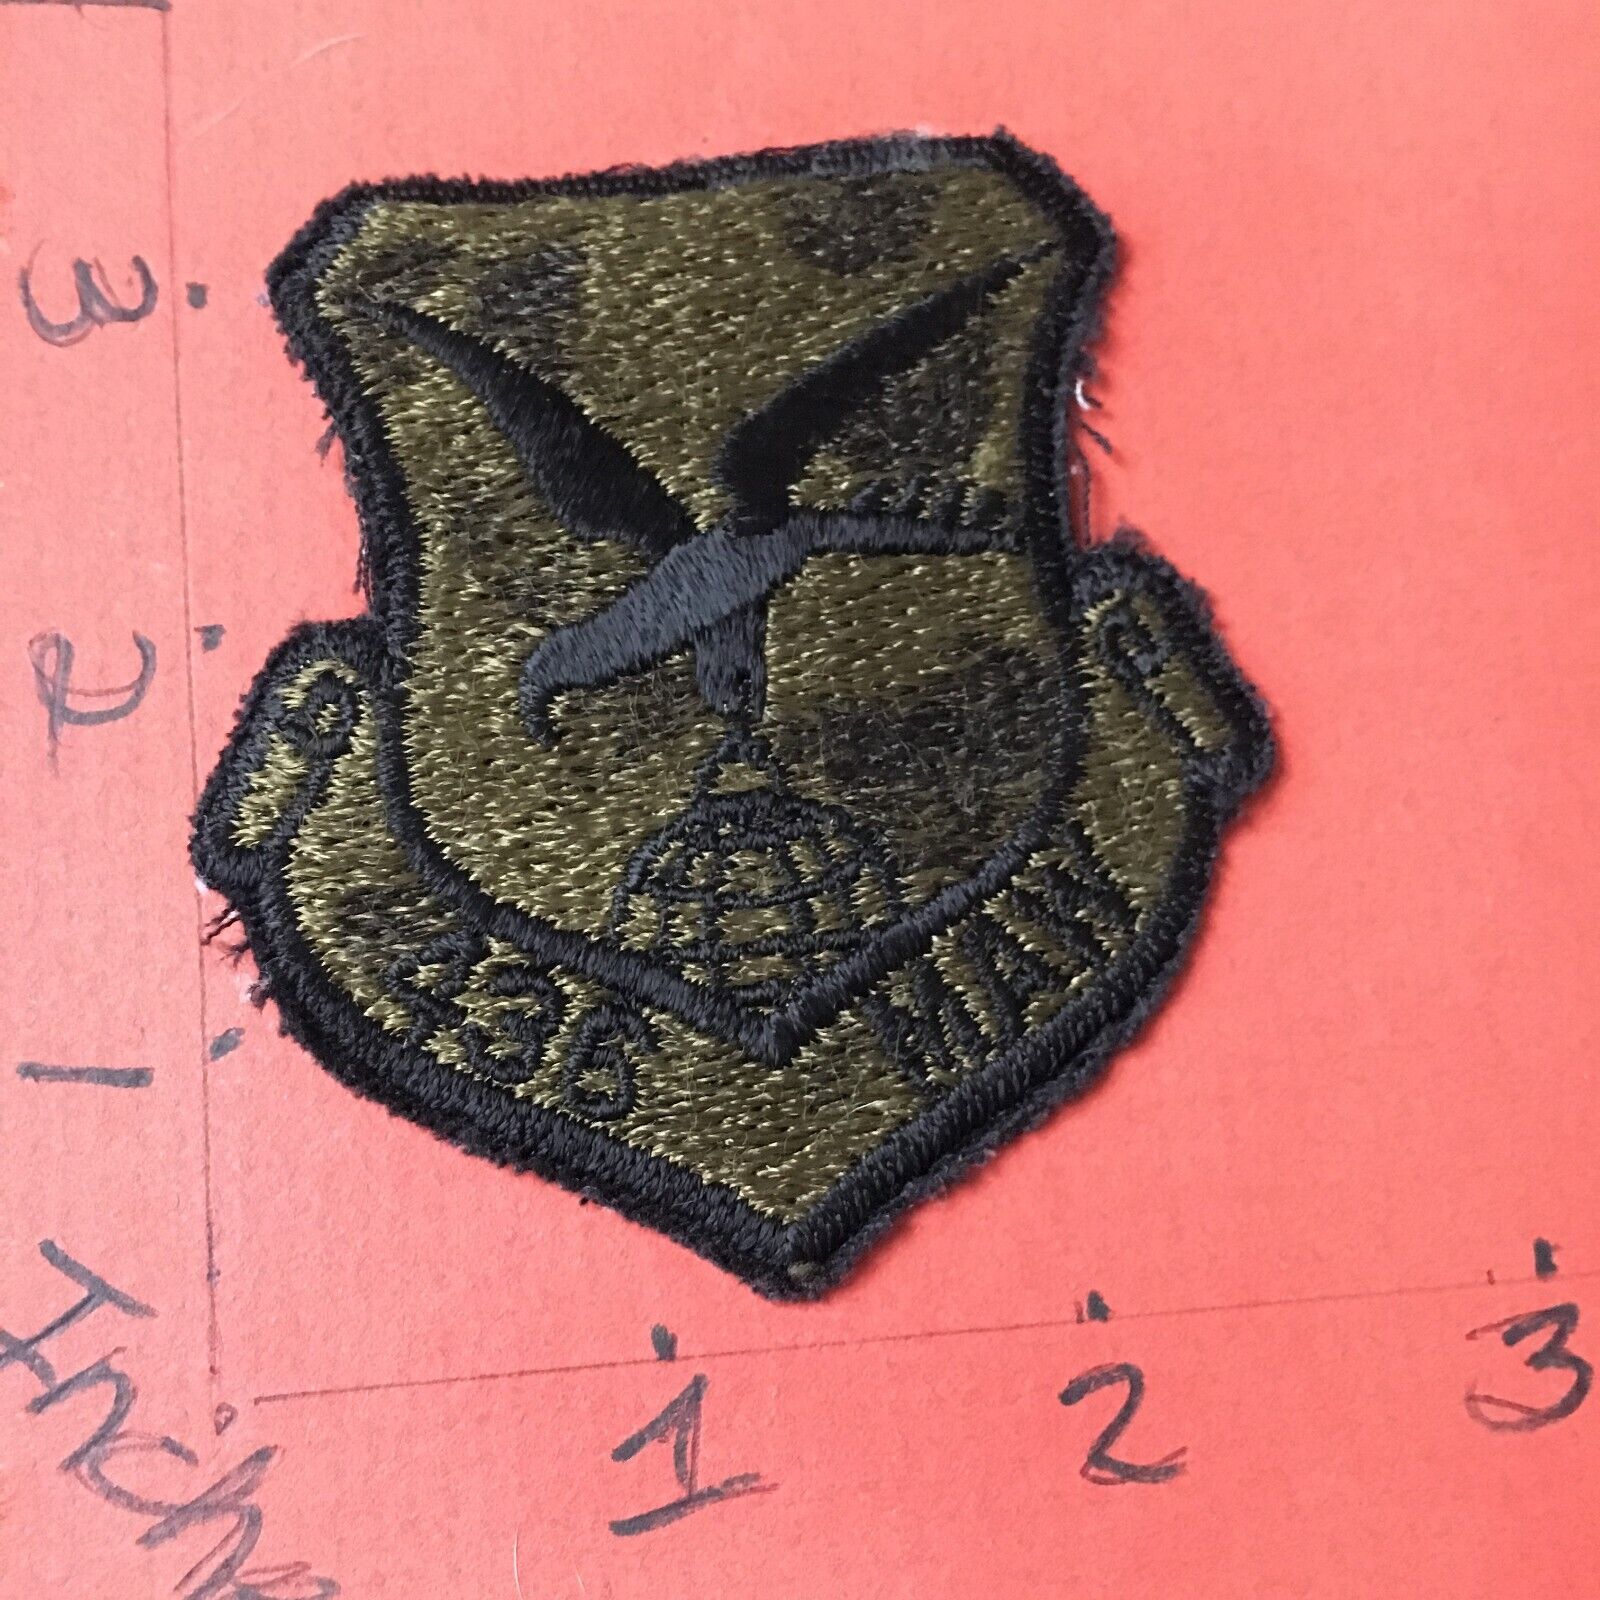 USAF 436th Military Airlift Wing Squadron subdued Patch 4/23